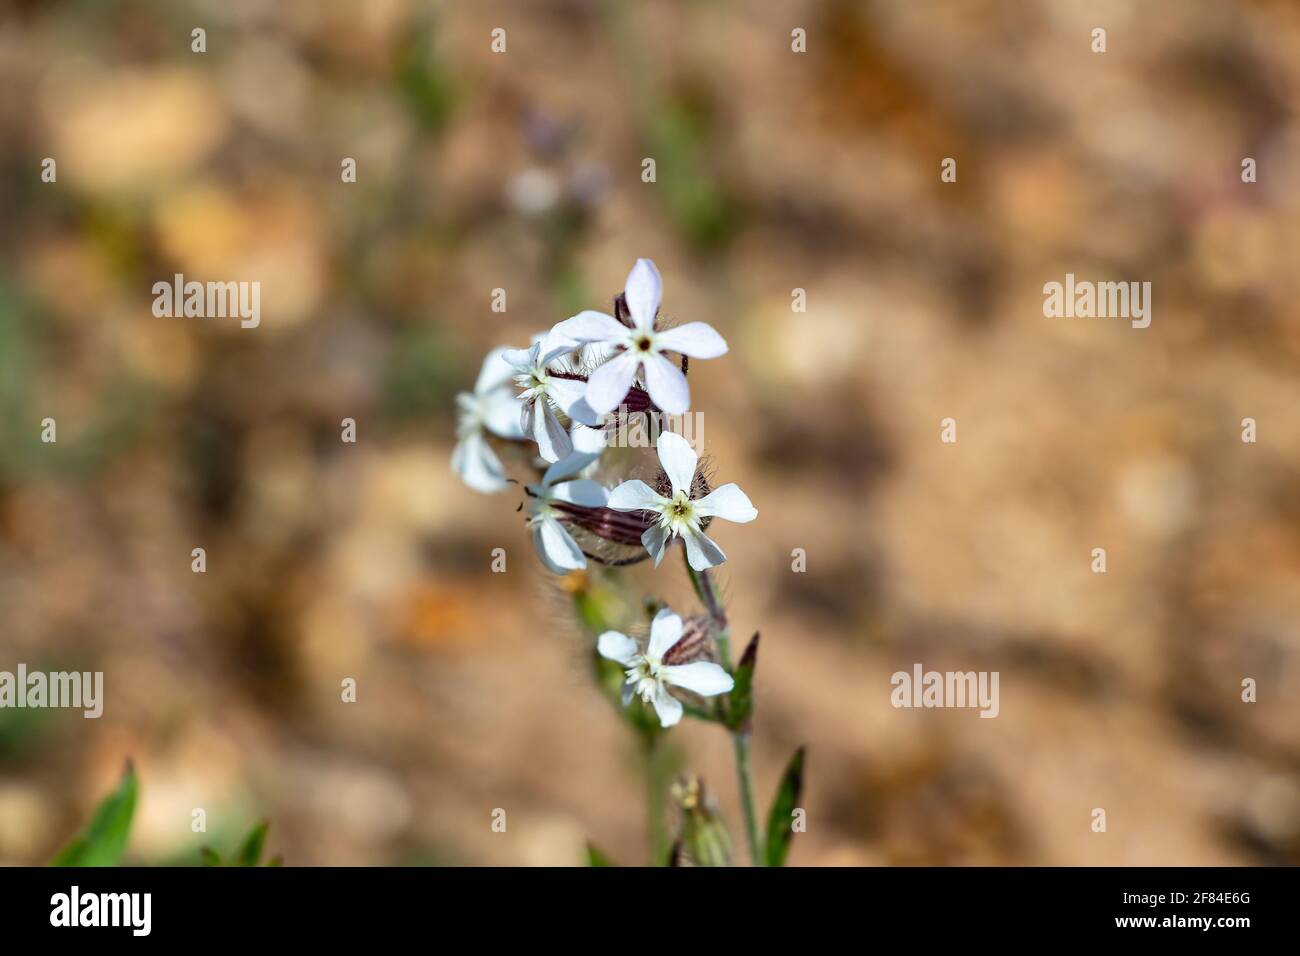 Silene gallica is a species of flowering plant in the family Caryophyllaceae known by several common names, including common catchfly, small-flowered Stock Photo